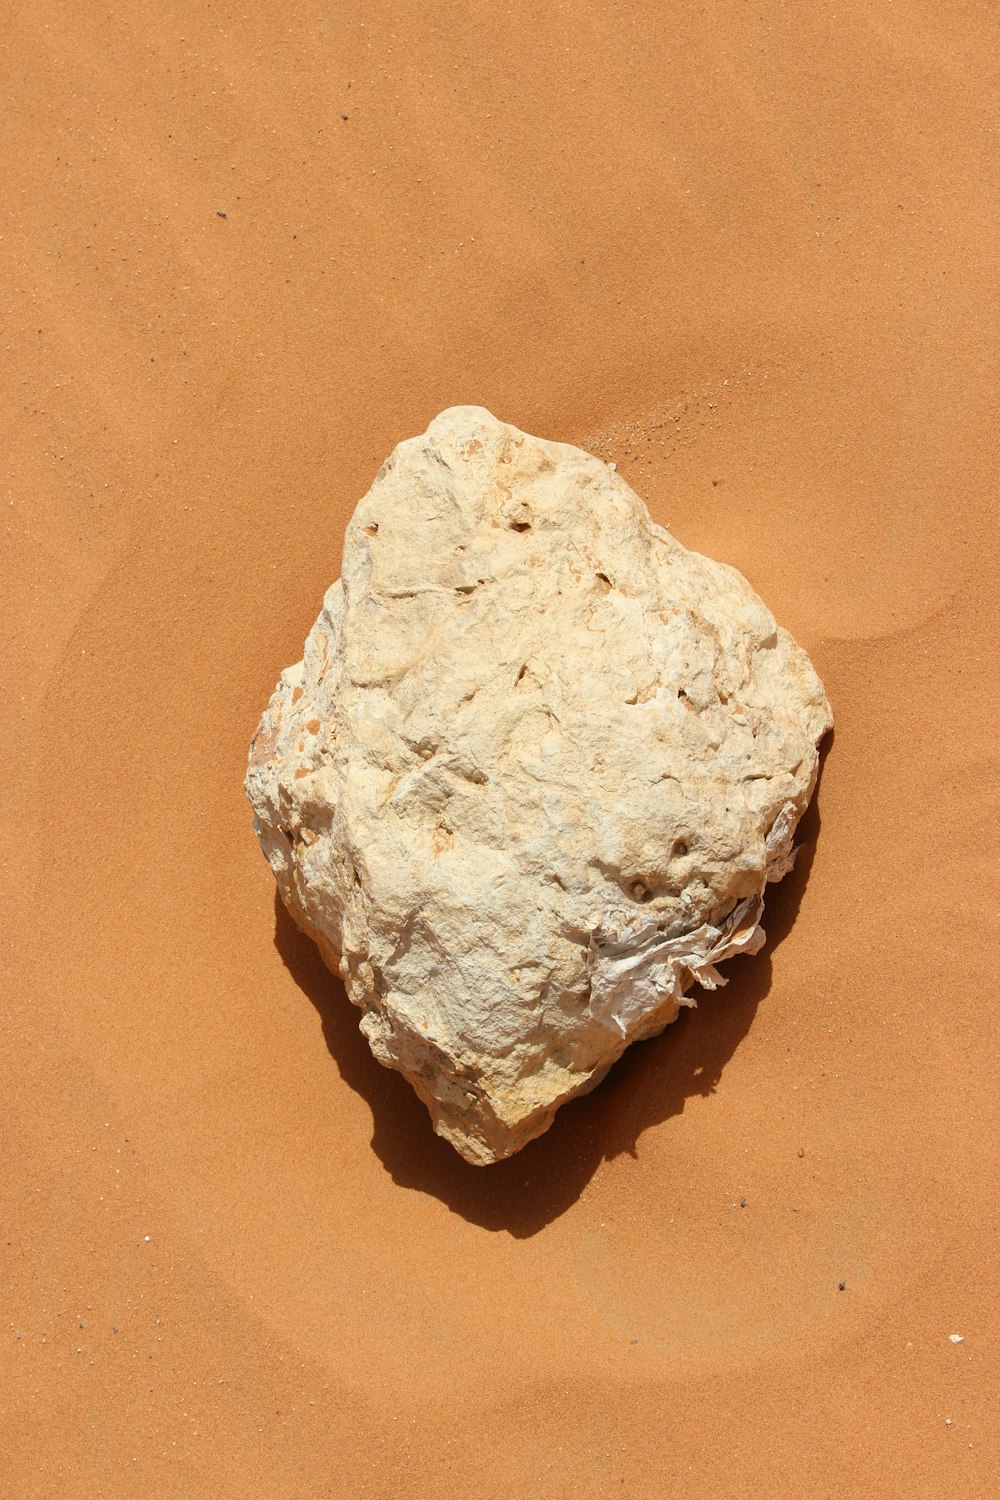 white and brown stone on brown sand